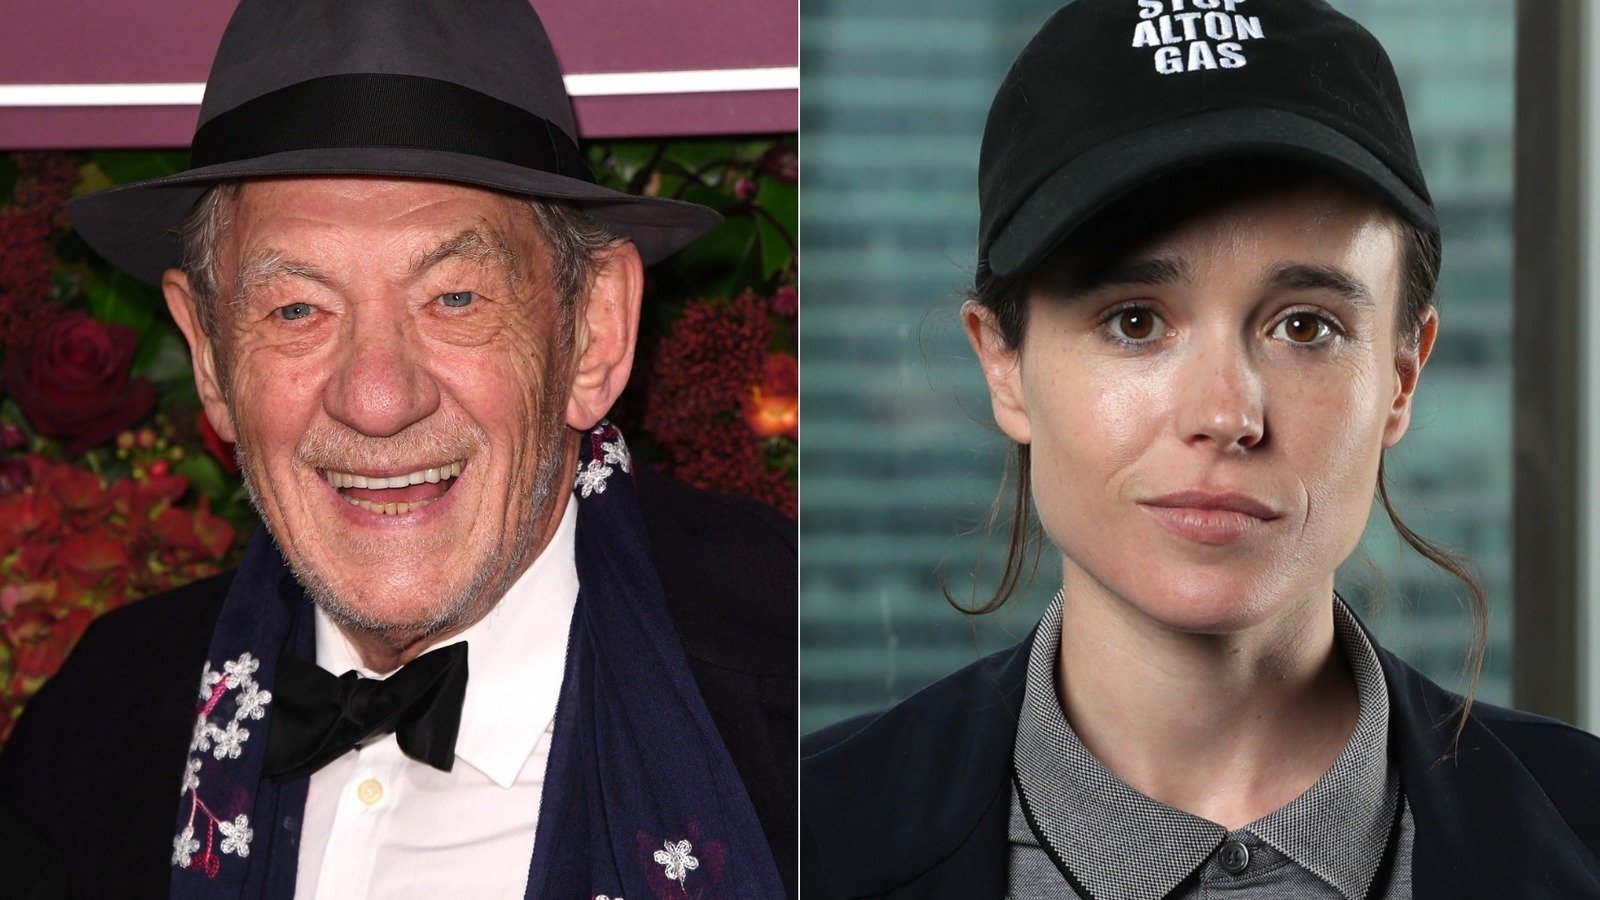 Ian McKellen Shares His Support And Happiness For X-Men Co-Star Elliot Page